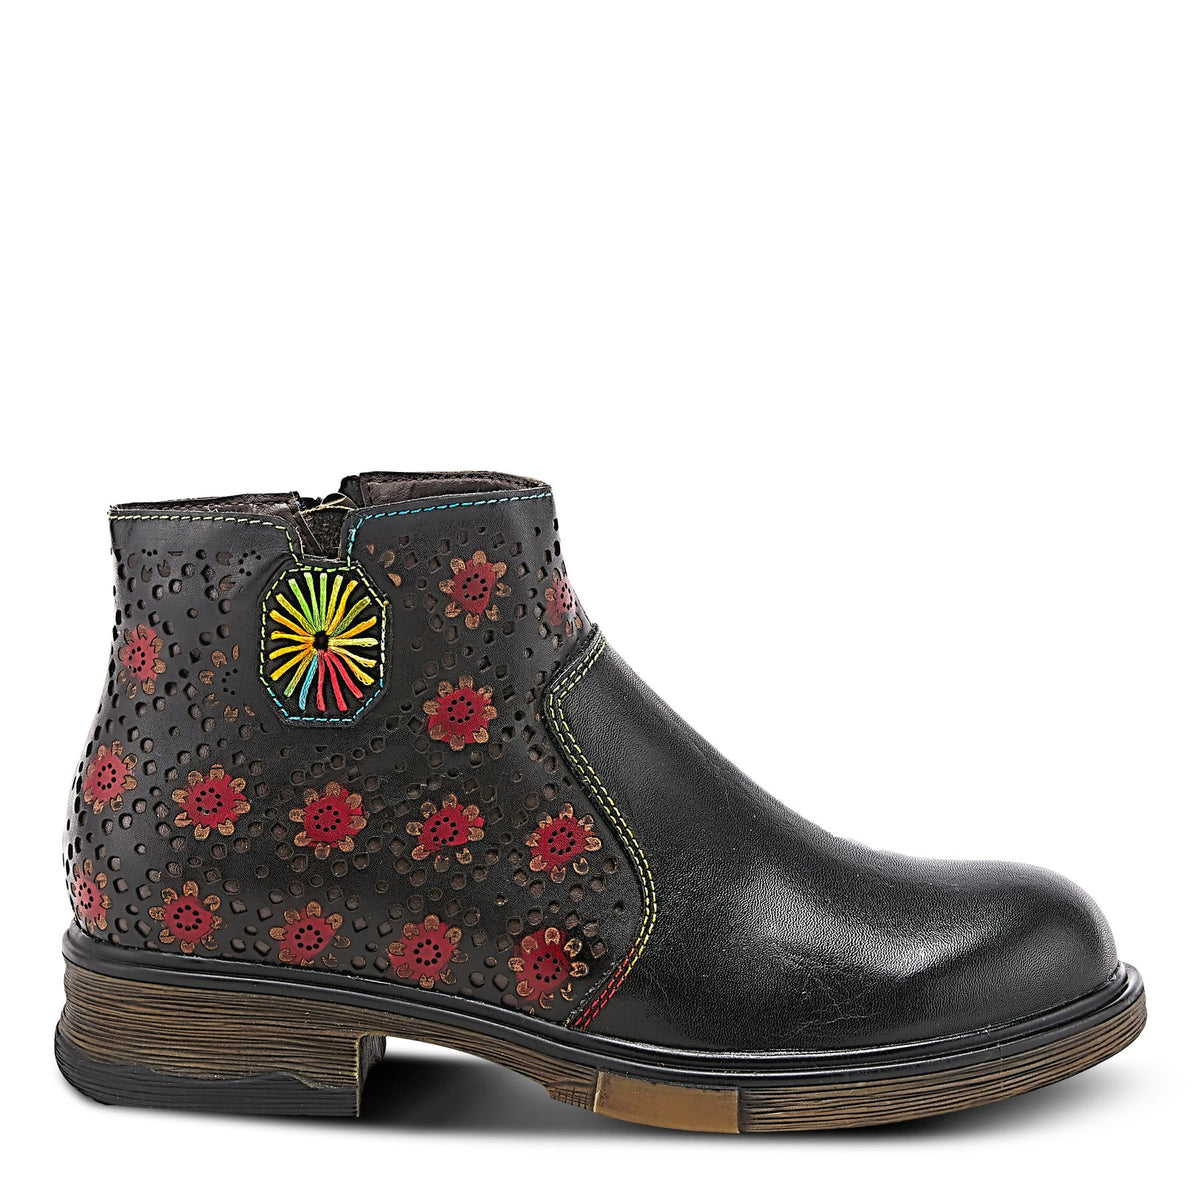 Fun leather L'Artiste by Springstep Footwear bootie showcasing beautiful abstract flowers, laser cuts, and our signature stitching on a comfortable outsole.